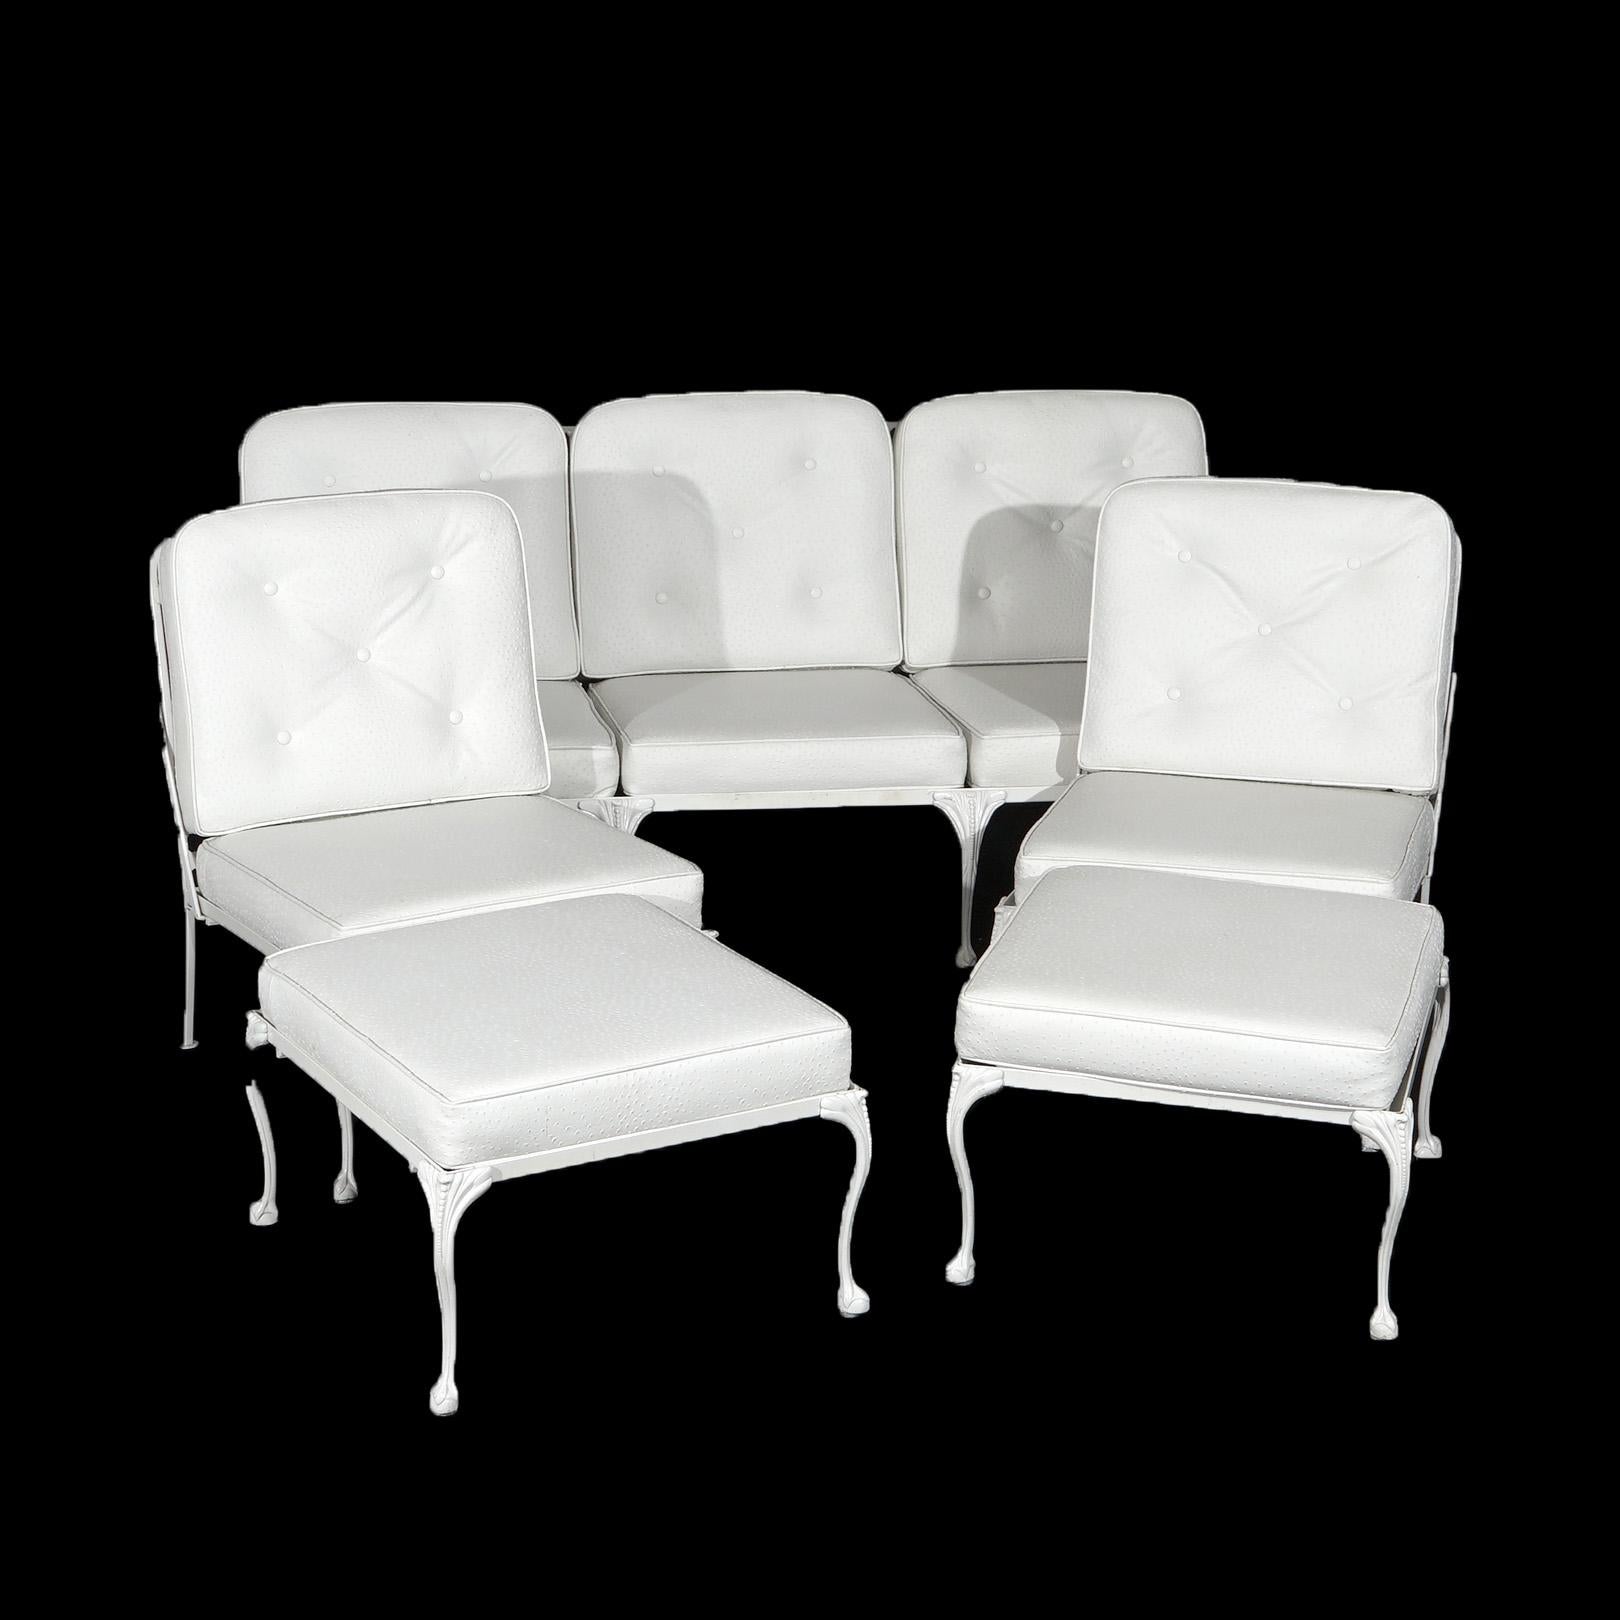 ***Ask About Reduced In-House Shipping Rates - Reliable Service & Fully Insured***
Painted, Foliate & Scrolled Wrought Iron Patio Set with Cabriole Legs includes Sofa, Two Chairs & Two Ottomans, 20th C

Measures- Couch: 32.75''H x 66''W x 23''D;